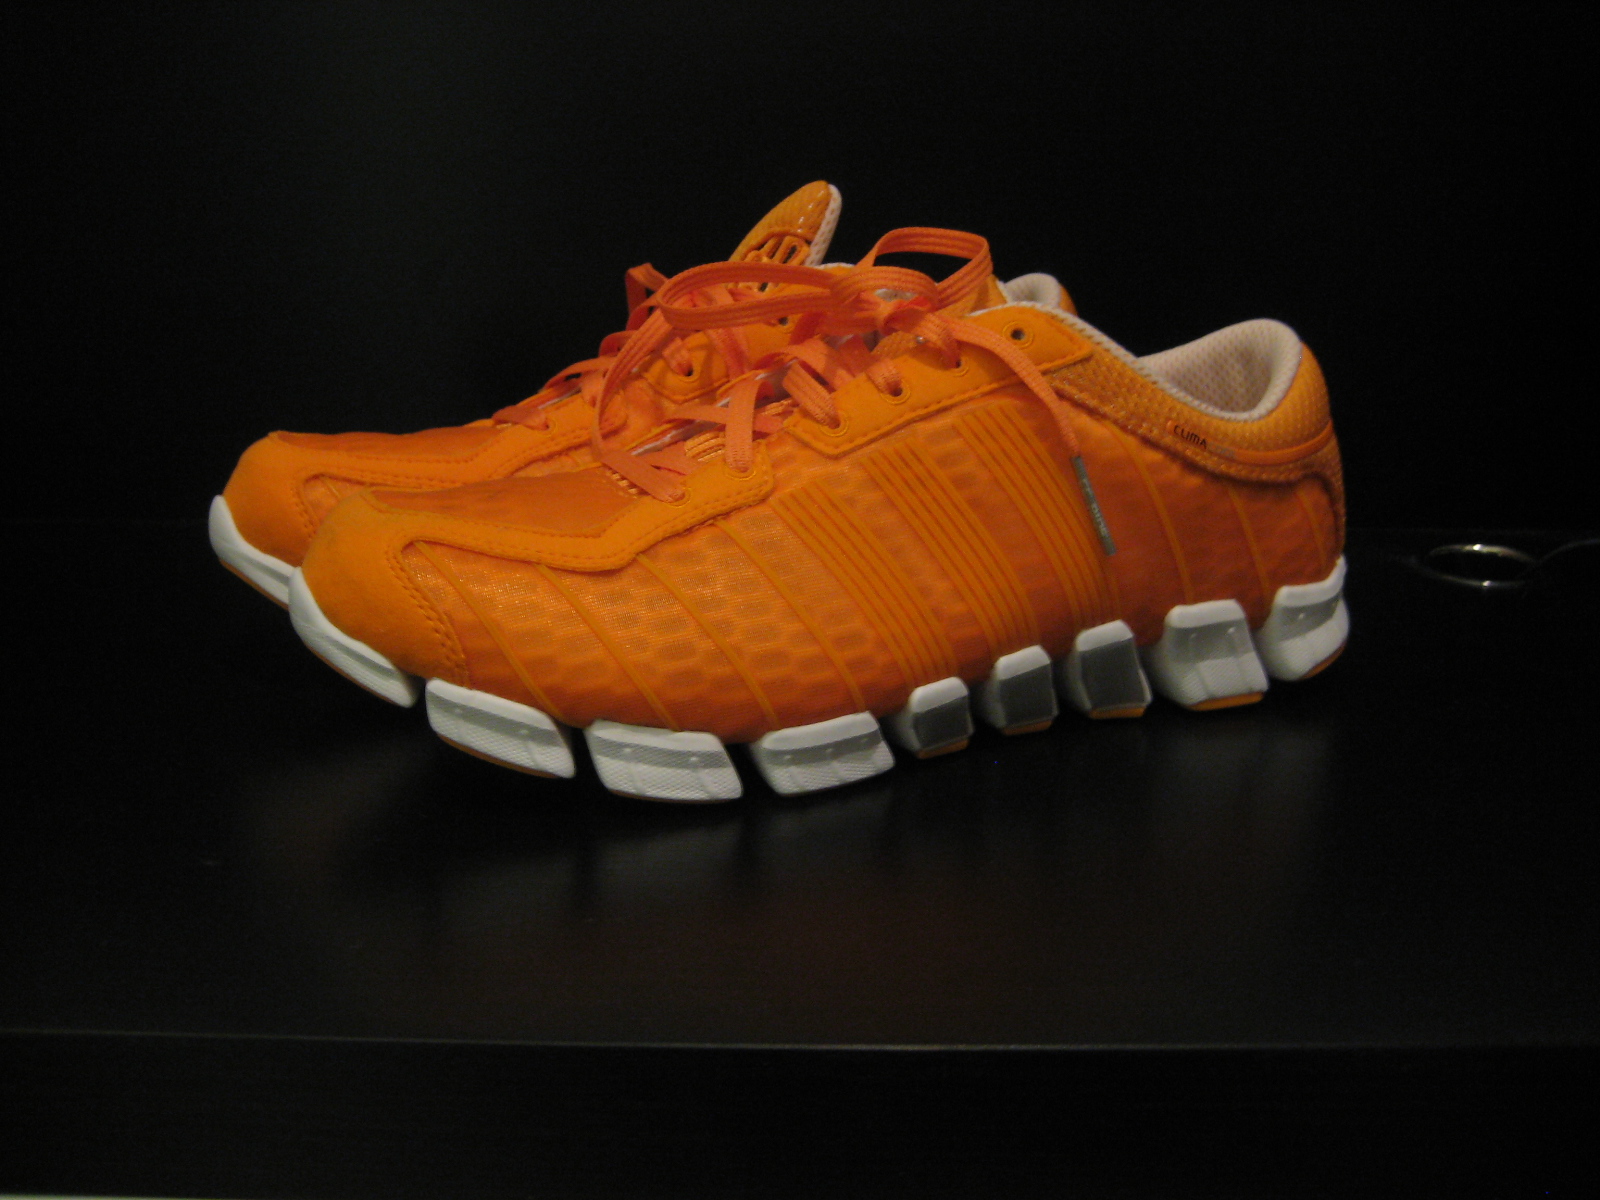 adidas climacool ride running shoes